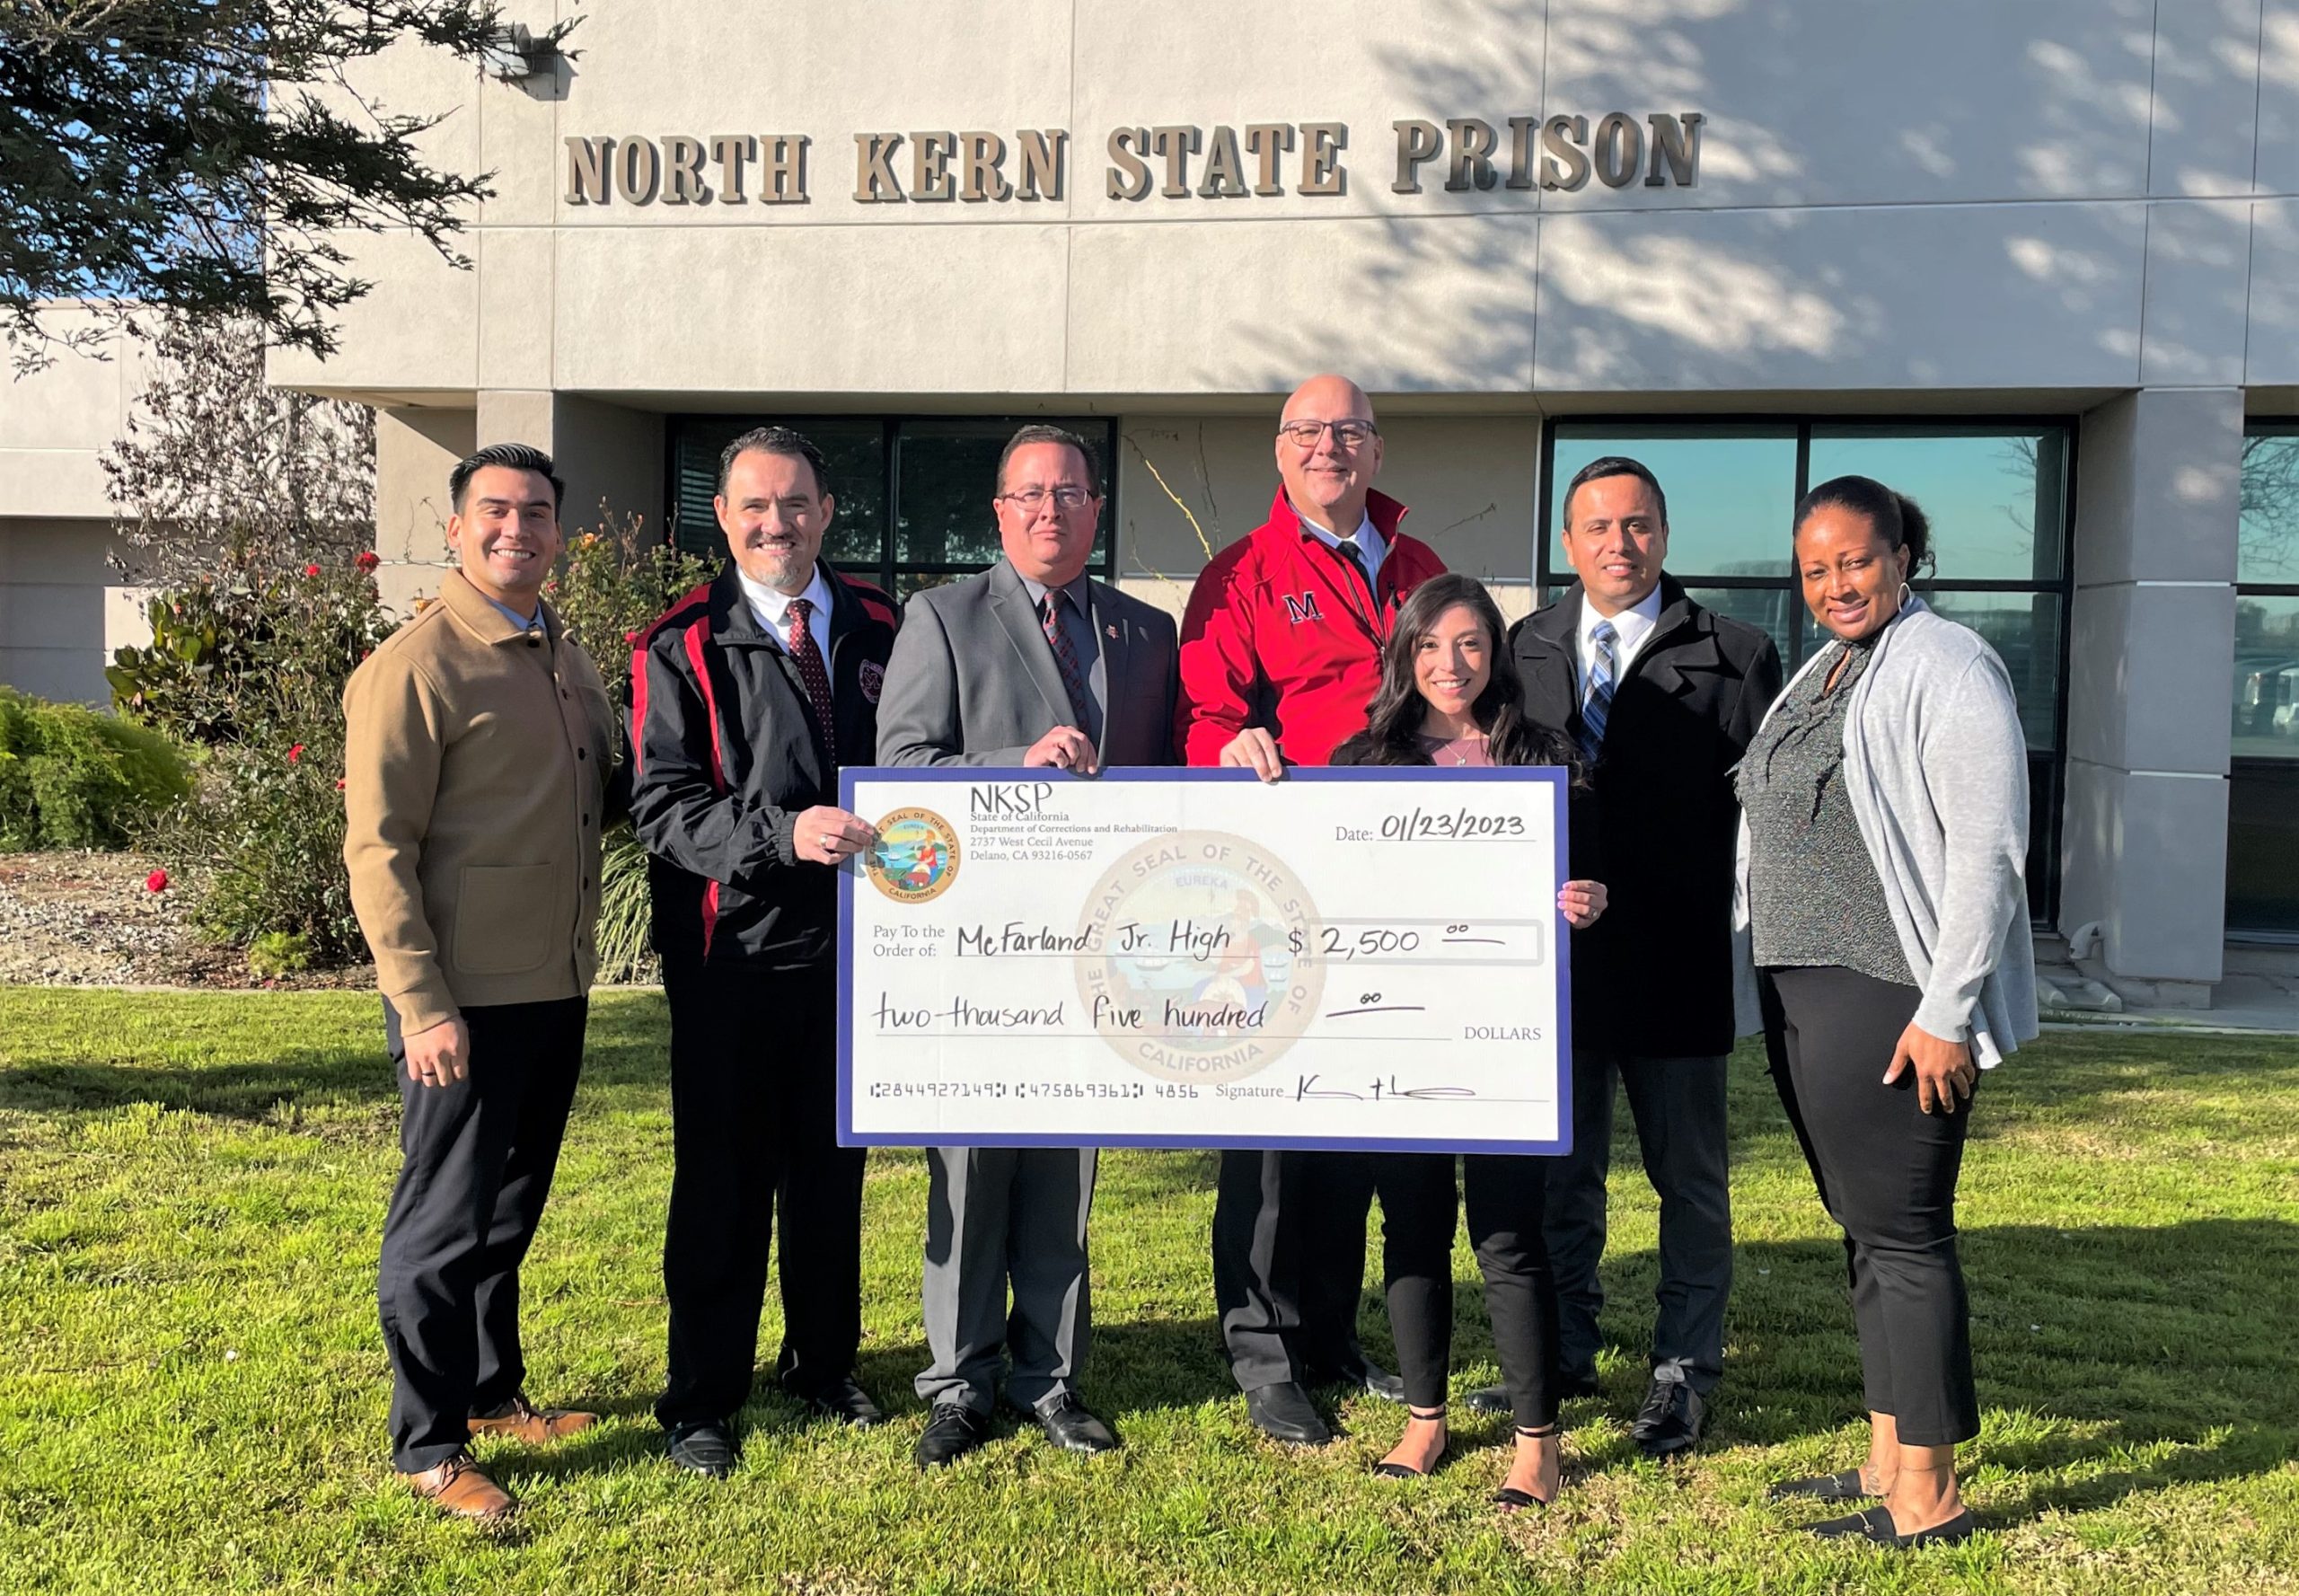 North Kern State Prison (NKSP) staff present check to school officials.